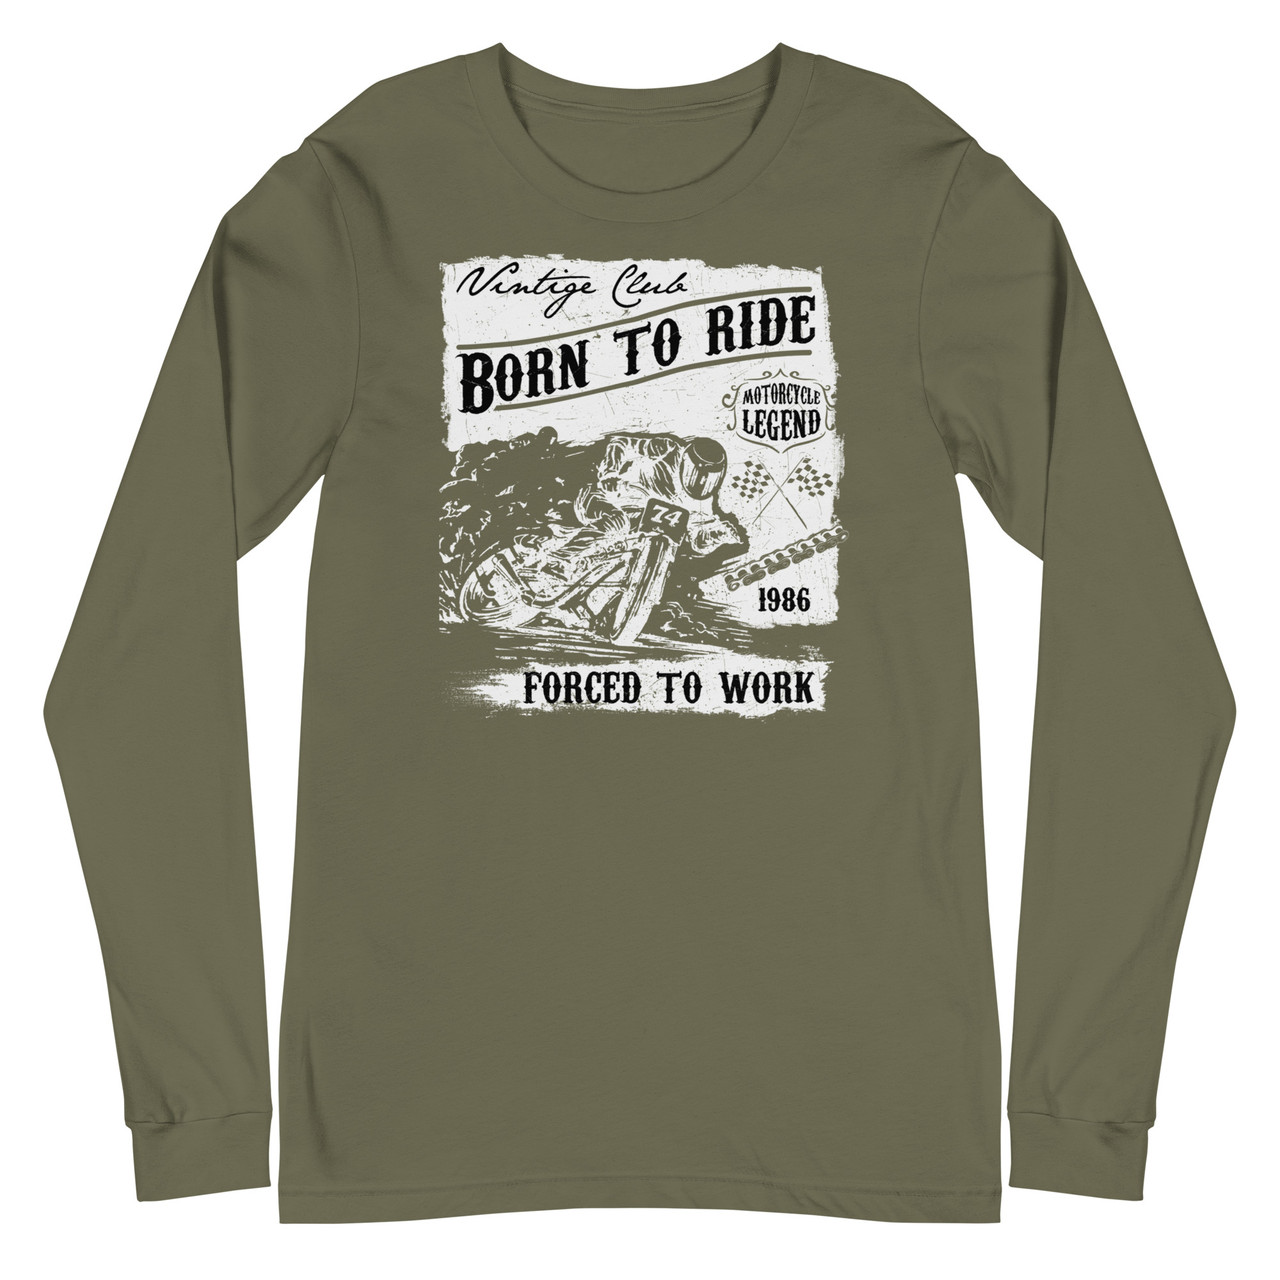 Military Green Unisex Long Sleeve Tee - Bella + Canvas 3501 Born to Ride